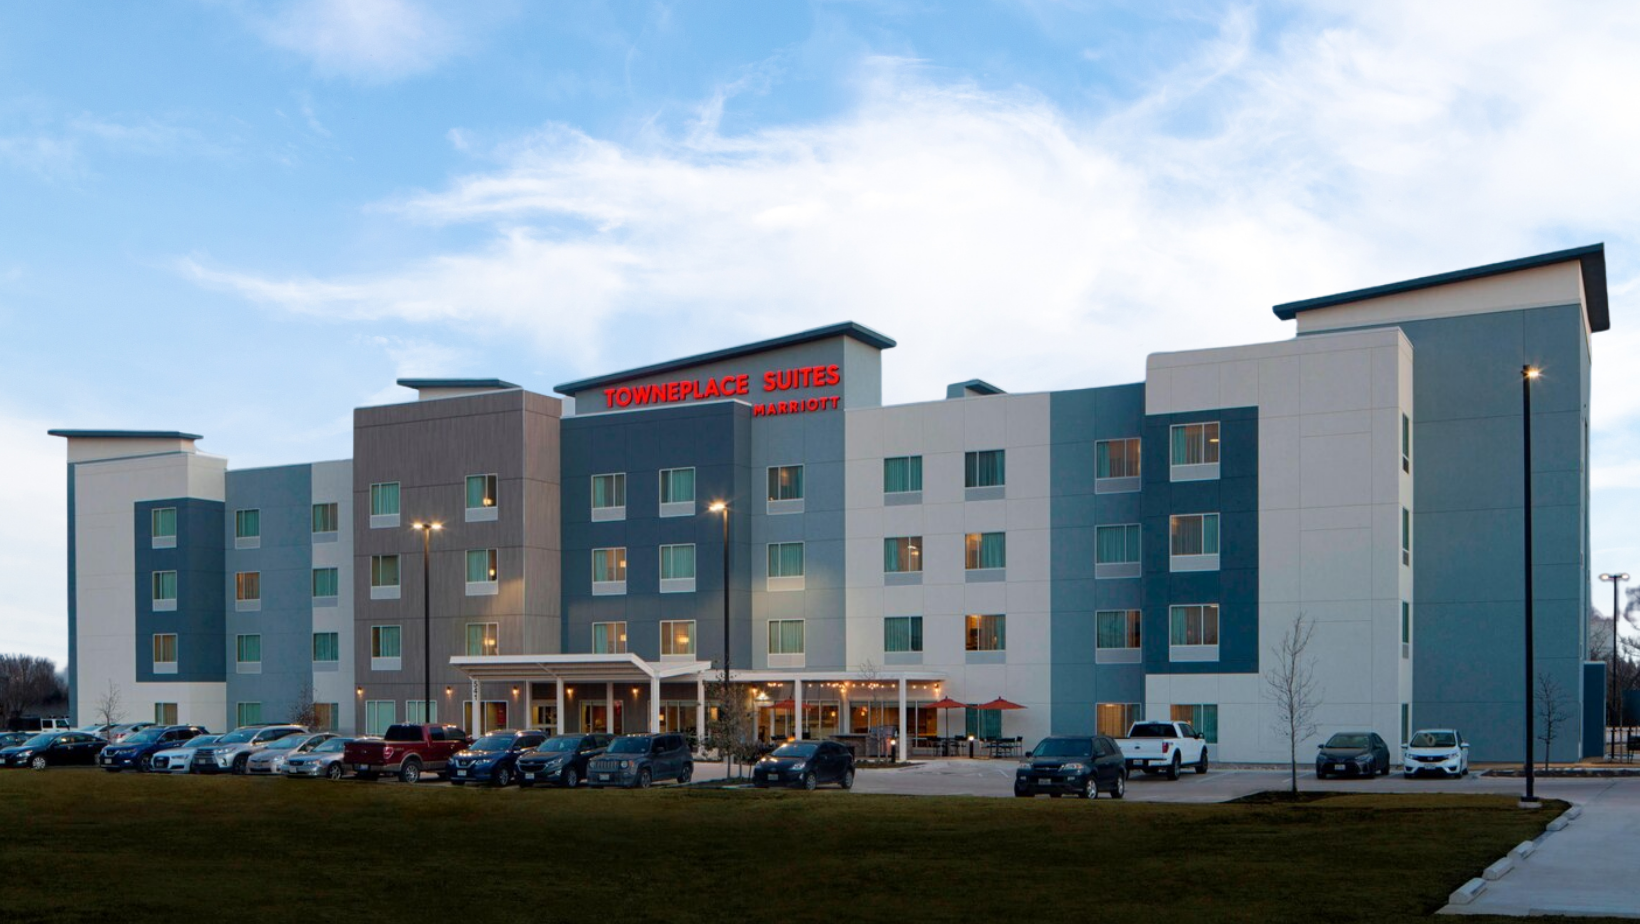 Towneplace Suites Austin/Round Rock